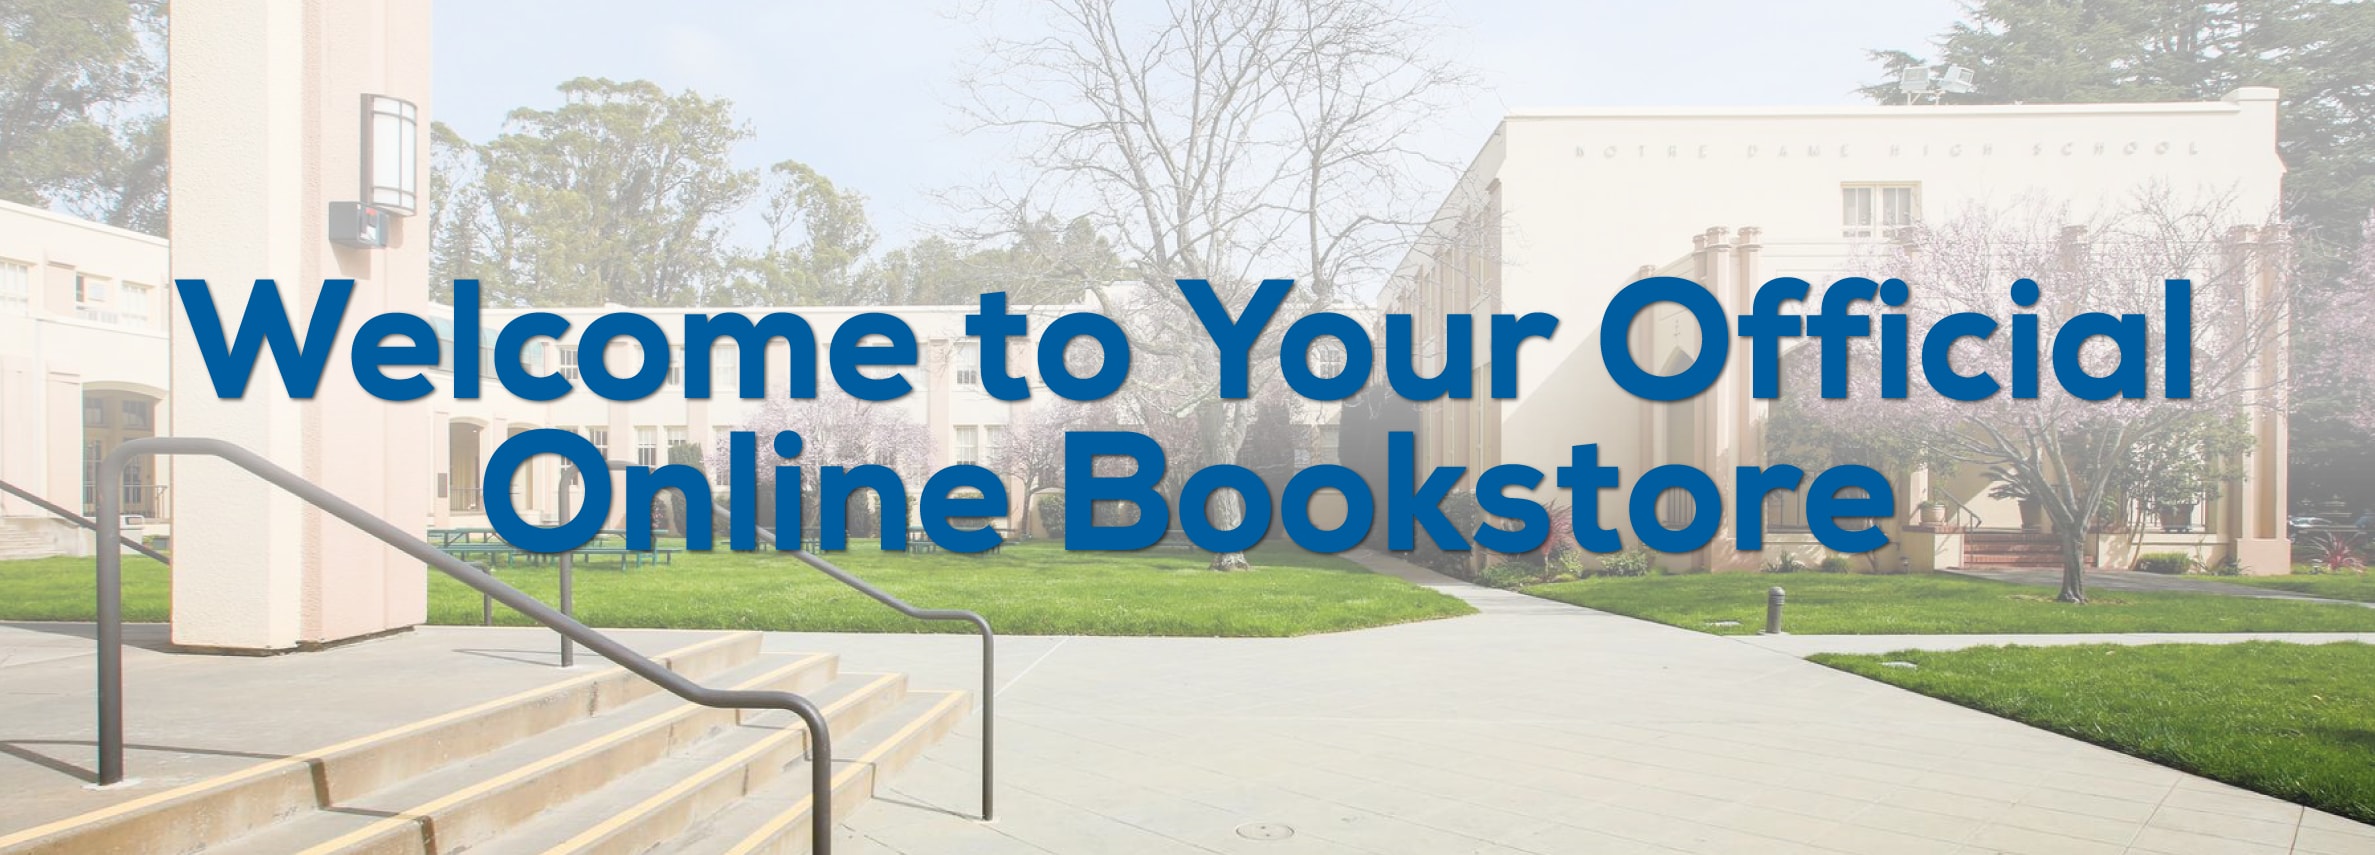 Welcome to your online bookstore.